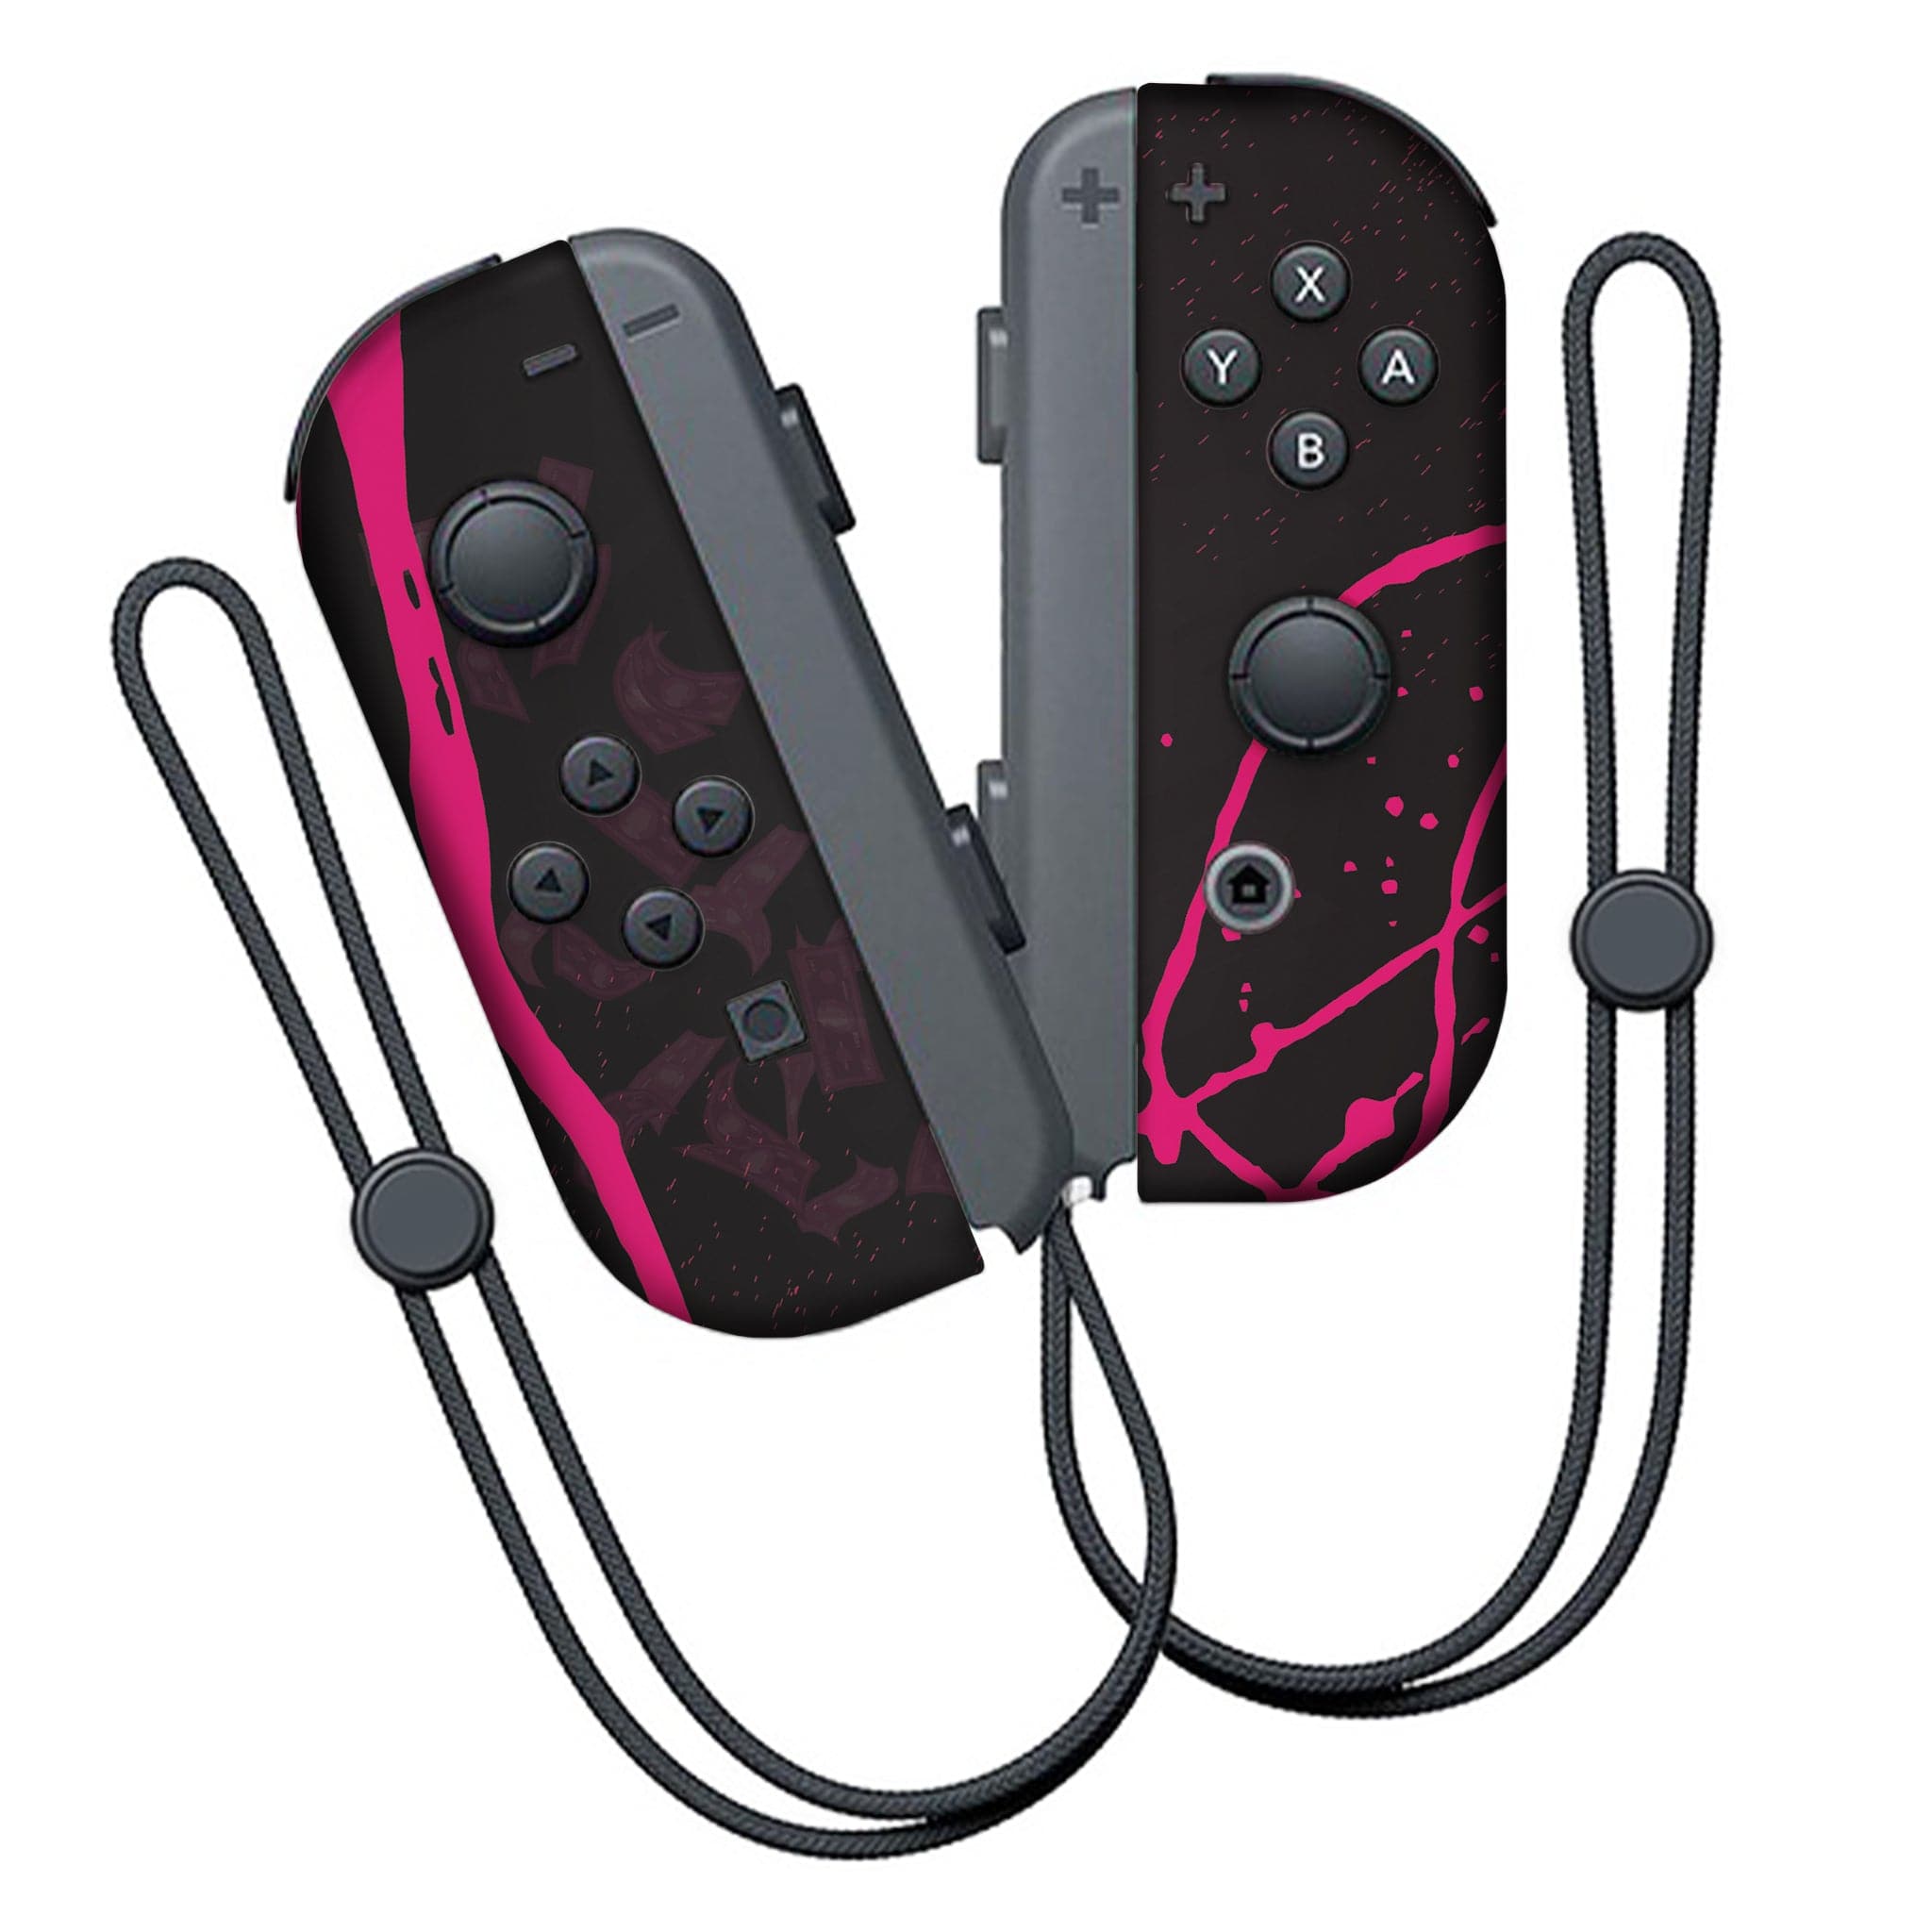 Squid Game Inspired Switch Joy-Con | Nintendo Switch E Shop